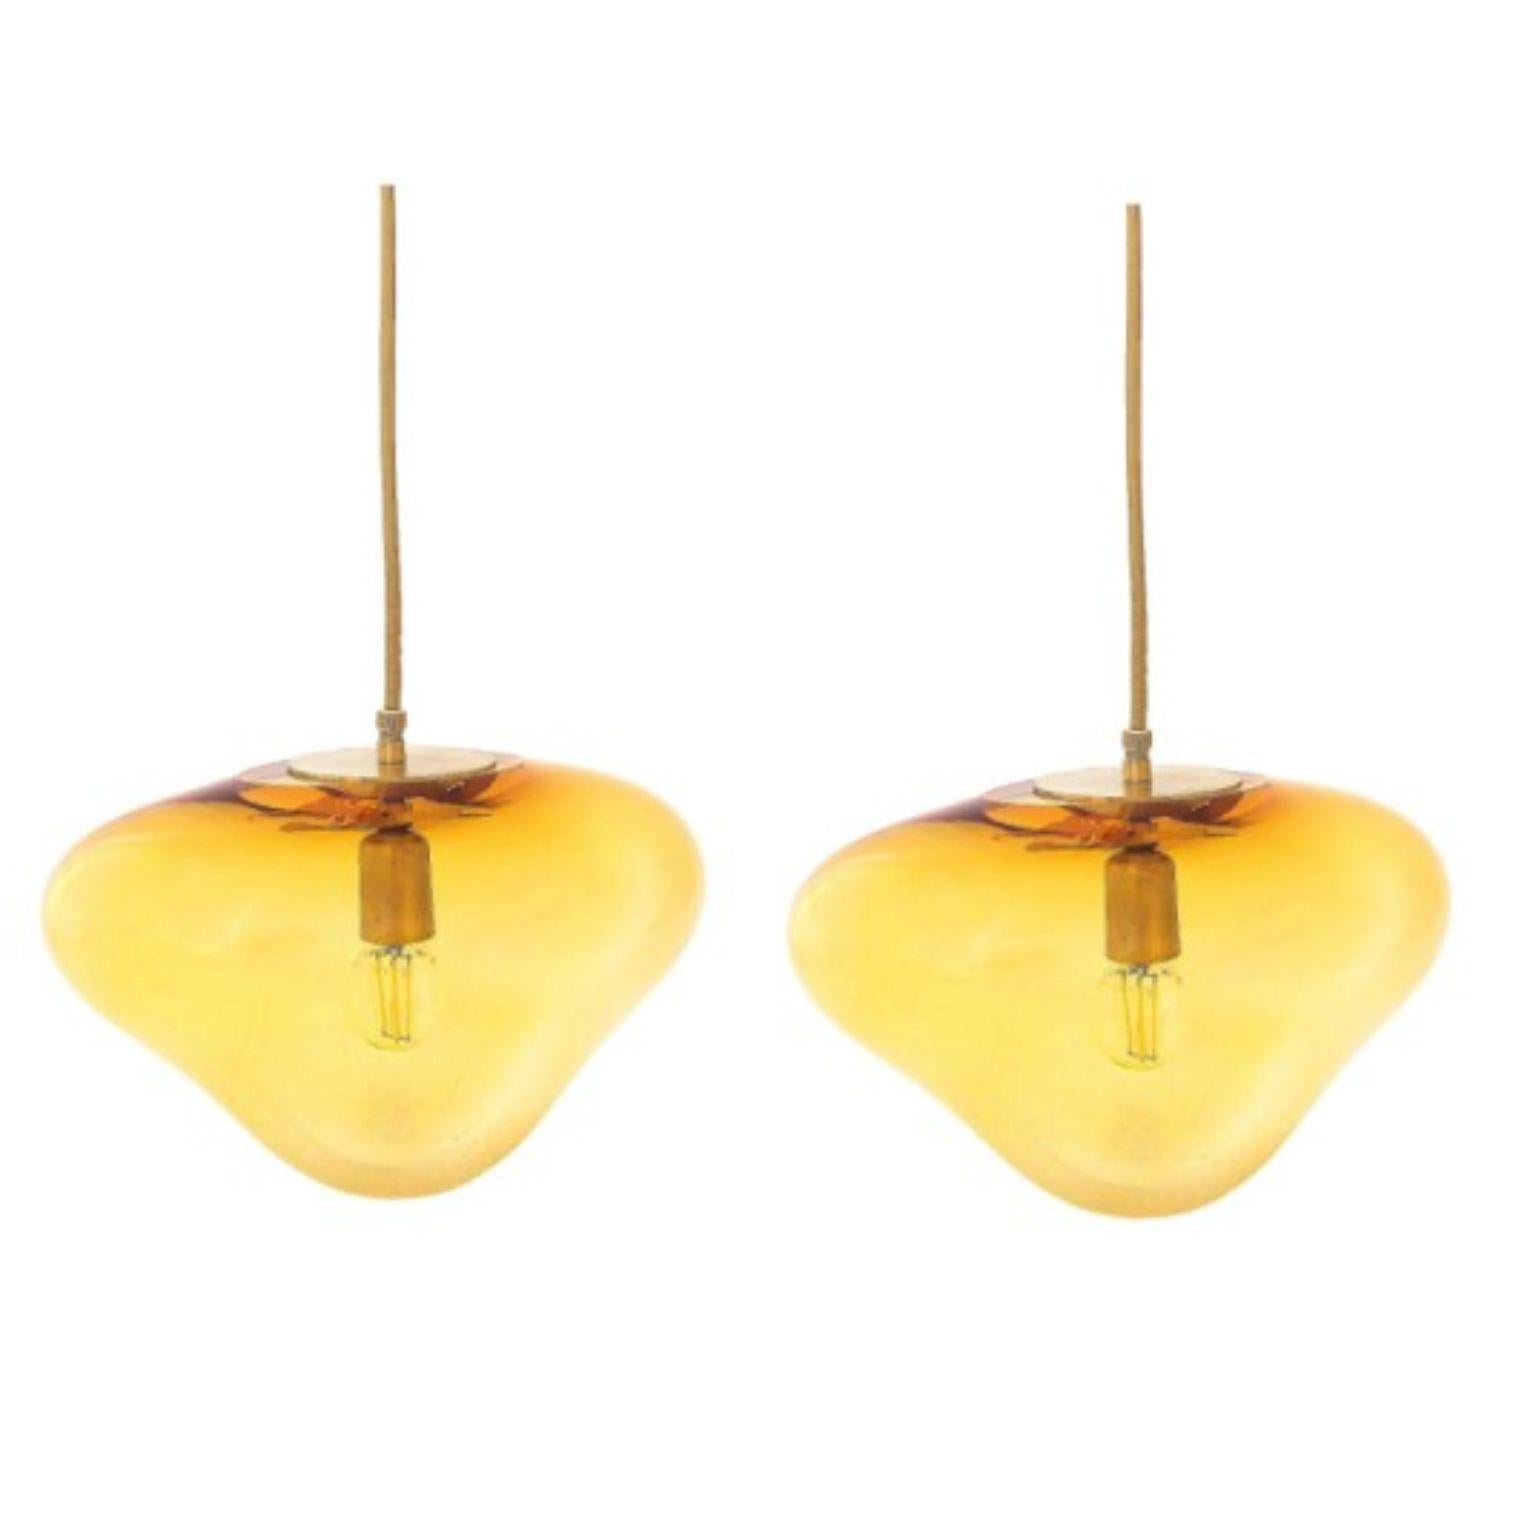 Set of 2 Planetoide Seresi gold pendants by Eloa.
No UL listed 
Material: Glass, steel, silver, LED bulb
Dimensions: D 30 x W 30 x H 250 cm
Also available in different colours and dimensions.

All our lamps can be wired according to each country. If